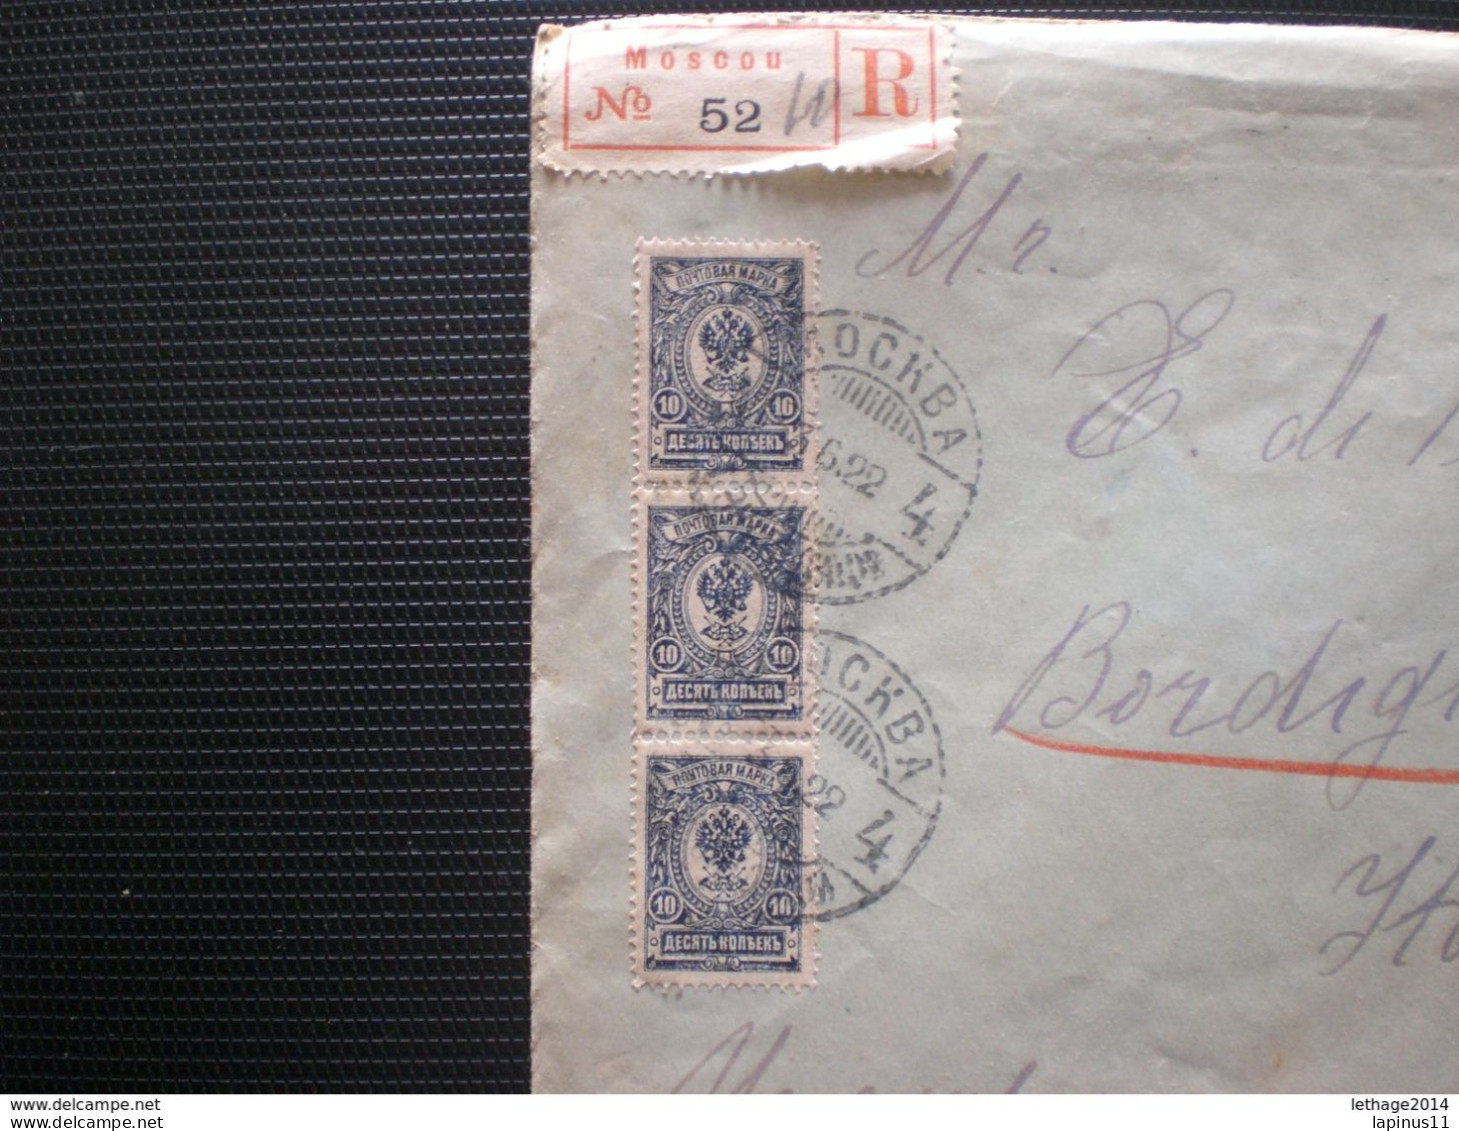 RUSSIA RUSSIE РОССИЯ STAMPS COVER 1922 REGISTER MAIL RUSSIE TO ITALY RRR RIF.TAGG. (78) - Cartas & Documentos